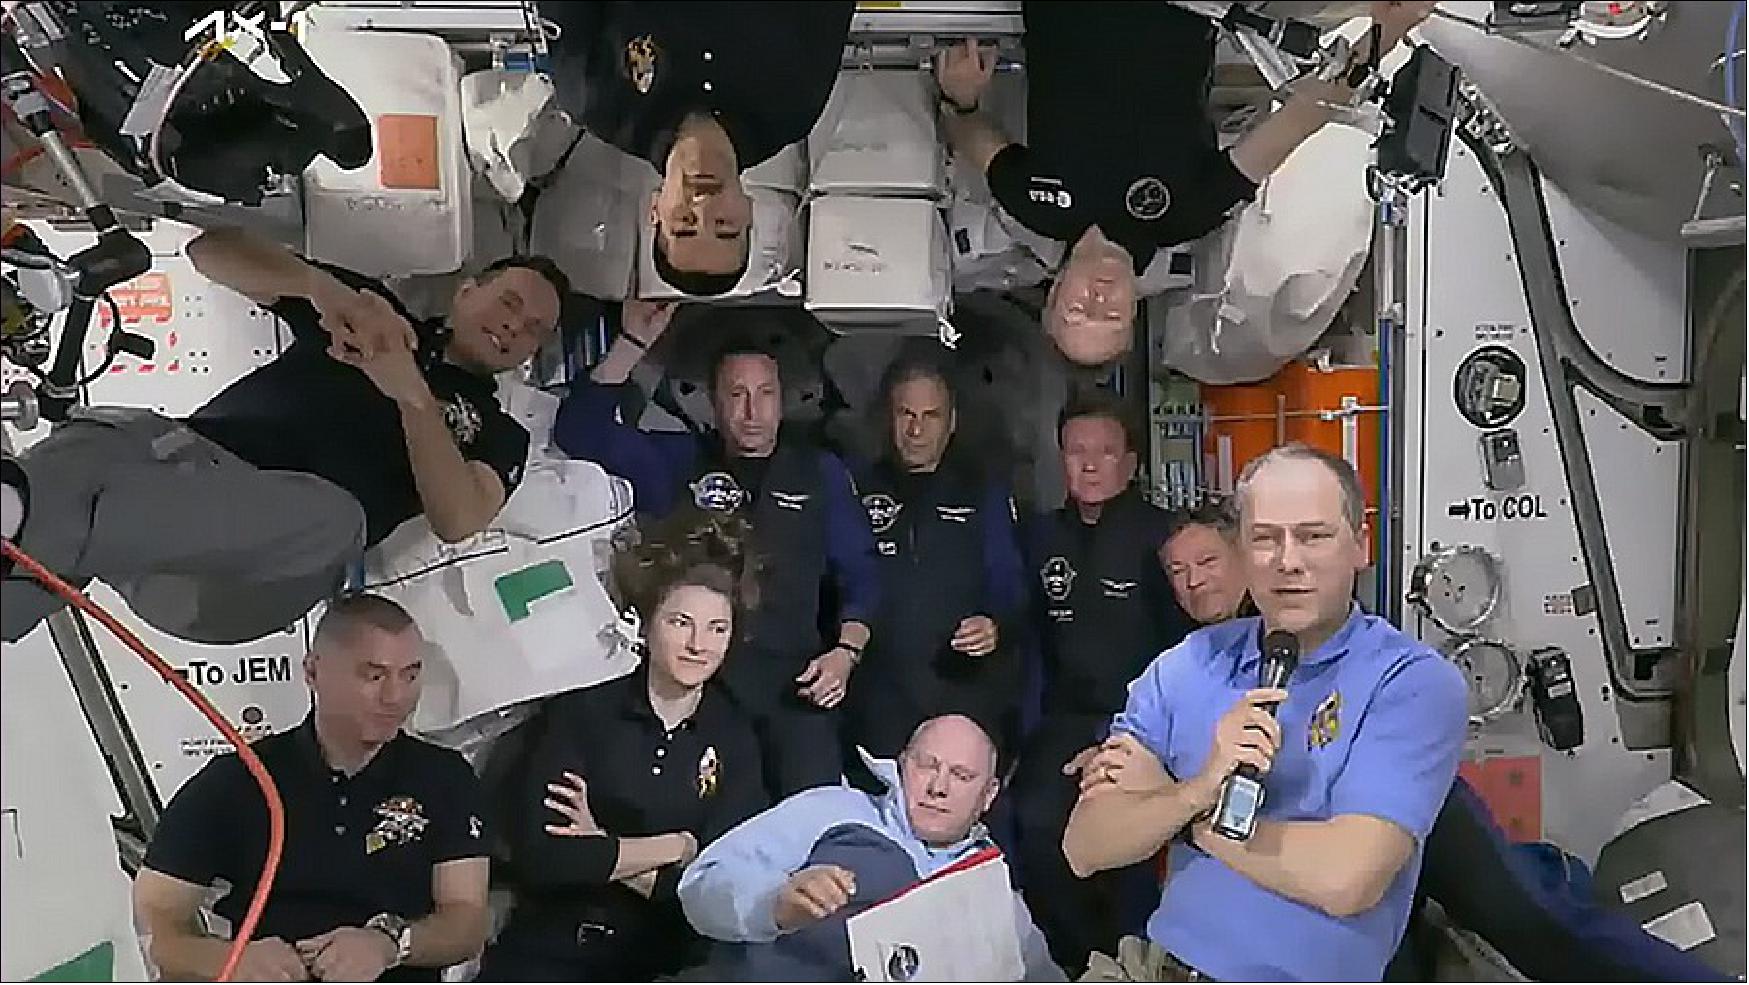 Figure 5: The 11-person crew aboard the station comprises of (bottom row from left) Expedition 67 Flight Engineers Denis Matveev, Kayla Barron, Oleg Artemyev, and station Commander Tom Marshburn; (center row from left) Axiom Mission 1 astronauts Mark Pathy, Eytan Stibbe, Larry COnnar, and Michael Lopez-Alegria; (top row from left) Expedition 67 Flight Engineers Sergey Korsakov, Raja Chari, and Matthias Maurer (image credit: NASA TV)